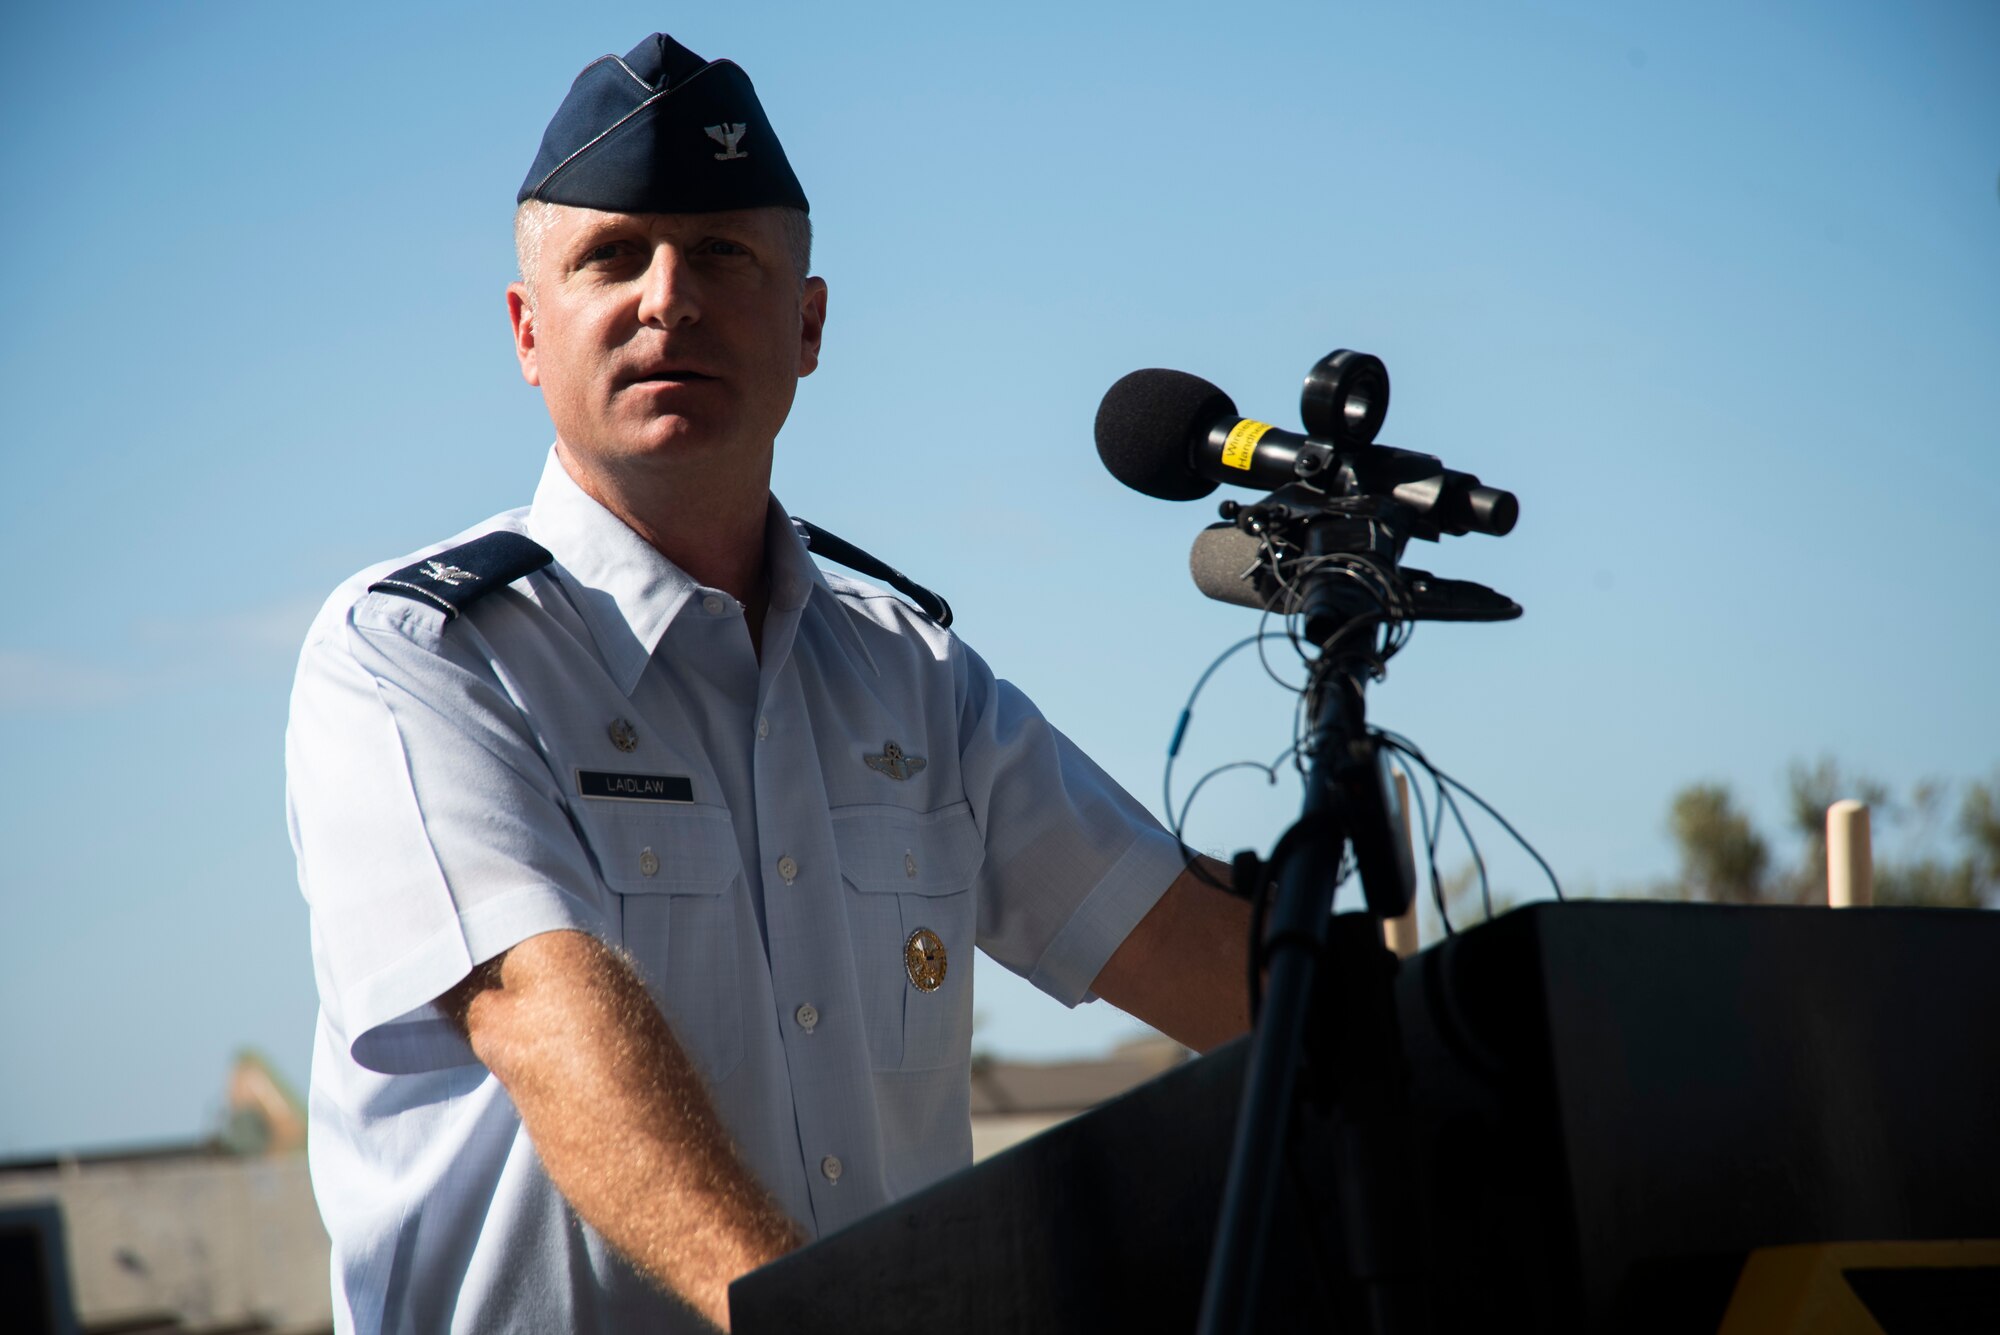 Brian Laidlaw, 325th Fighter Wing commander, speaks during a groundbreaking ceremony Nov. 6, 2019, at Tyndall Air Force Base, Florida. A groundbreaking ceremony for the U.S. 98/Tyndall Air Force Base Flyover was held at Tyndall’s Flag Park. The flyover will improve mobility by separating through traffic on U.S. 98 from drivers entering and exiting Tyndall. The project represents a continued partnership with the State of Florida in supporting the rebuild process of Tyndall. This was a collaborative effort of the Florida Department of Transportation, the Federal Highway Administration, and Tyndall’s 325th Fighter Wing. (U.S. Air Force photo by Staff Sgt. Magen M. Reeves)